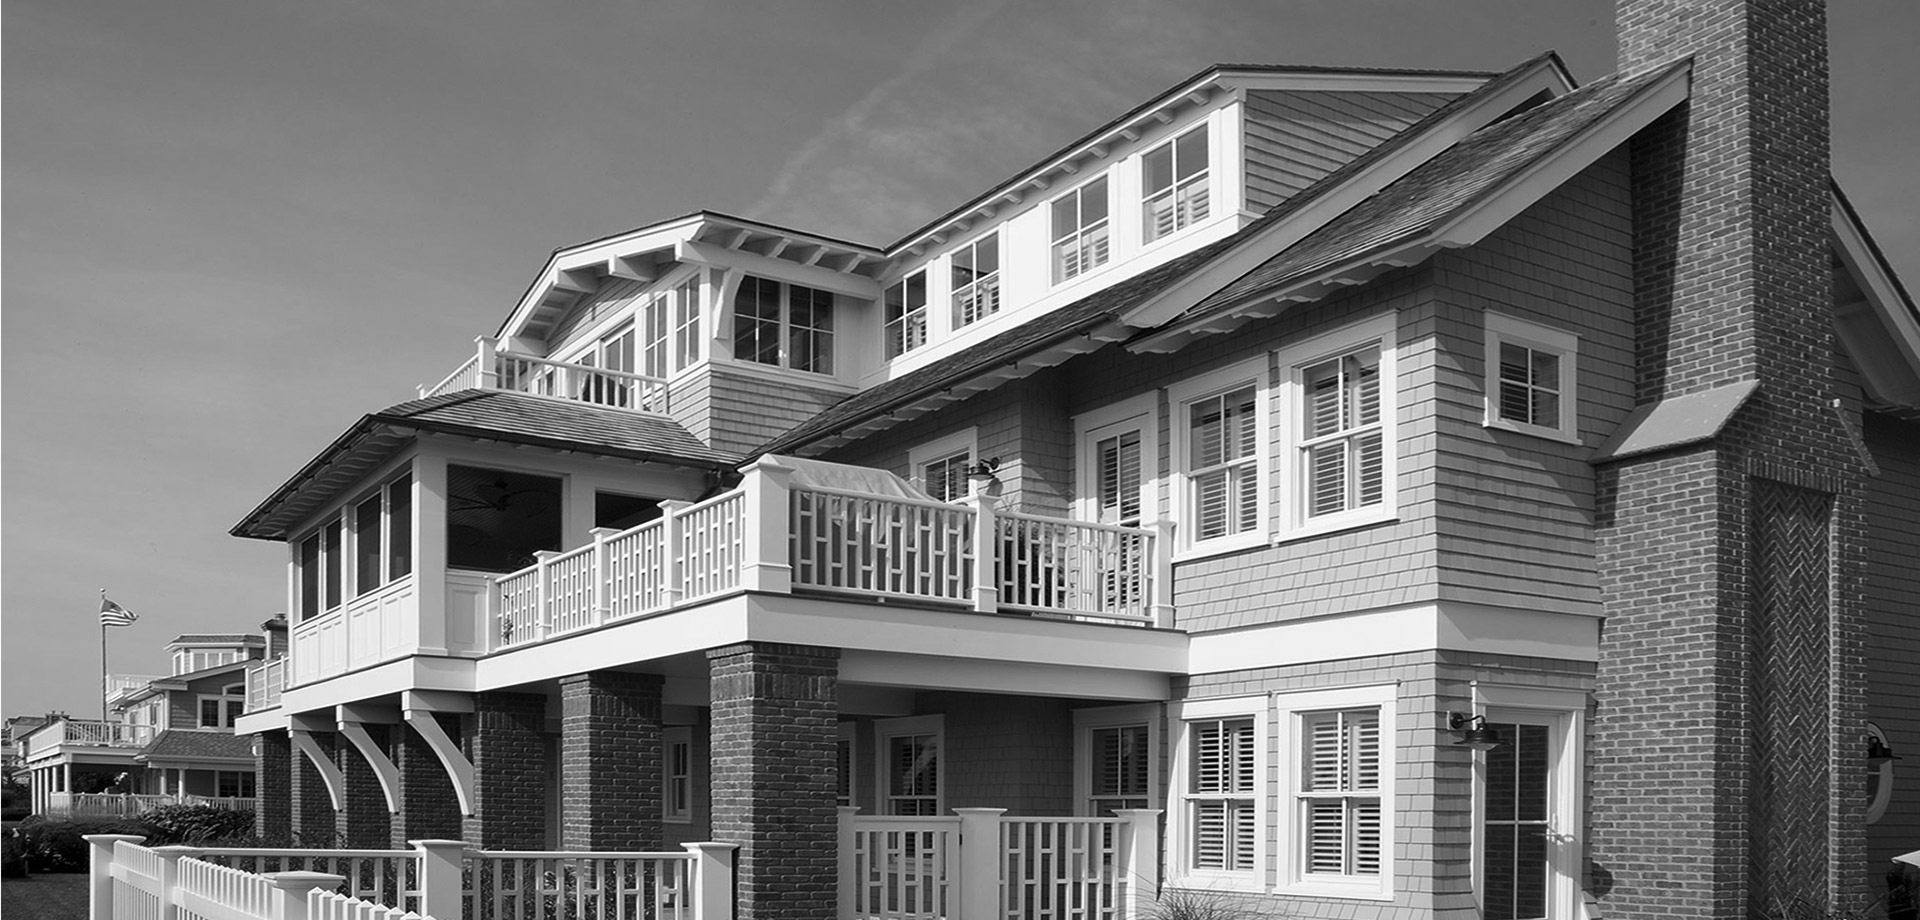 A black and white photo of a building with balconies.